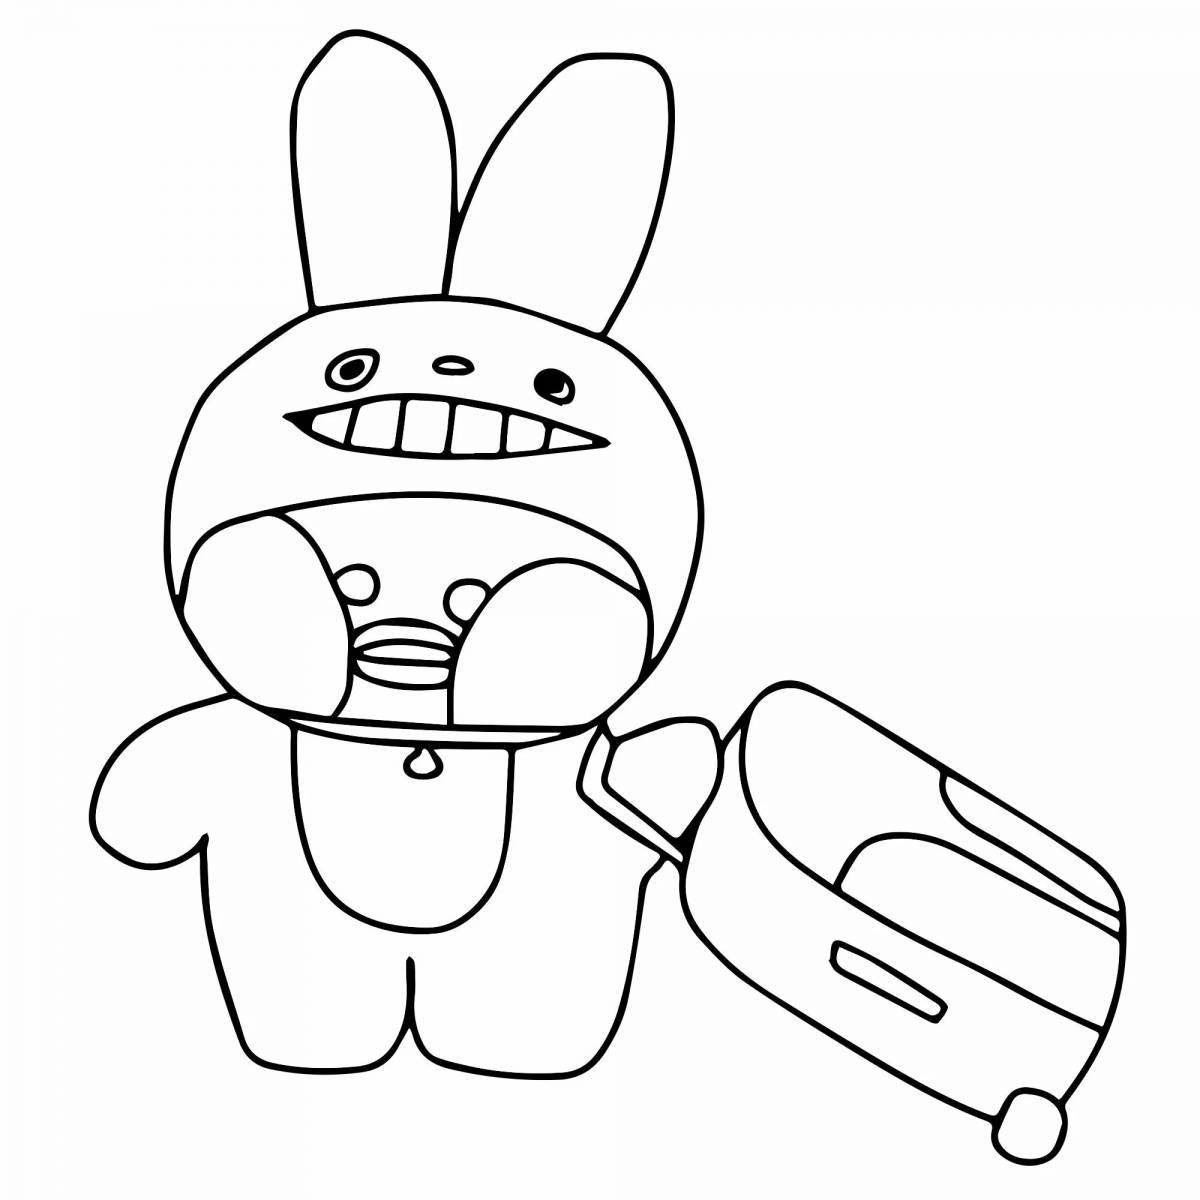 Playful lafafan coloring page